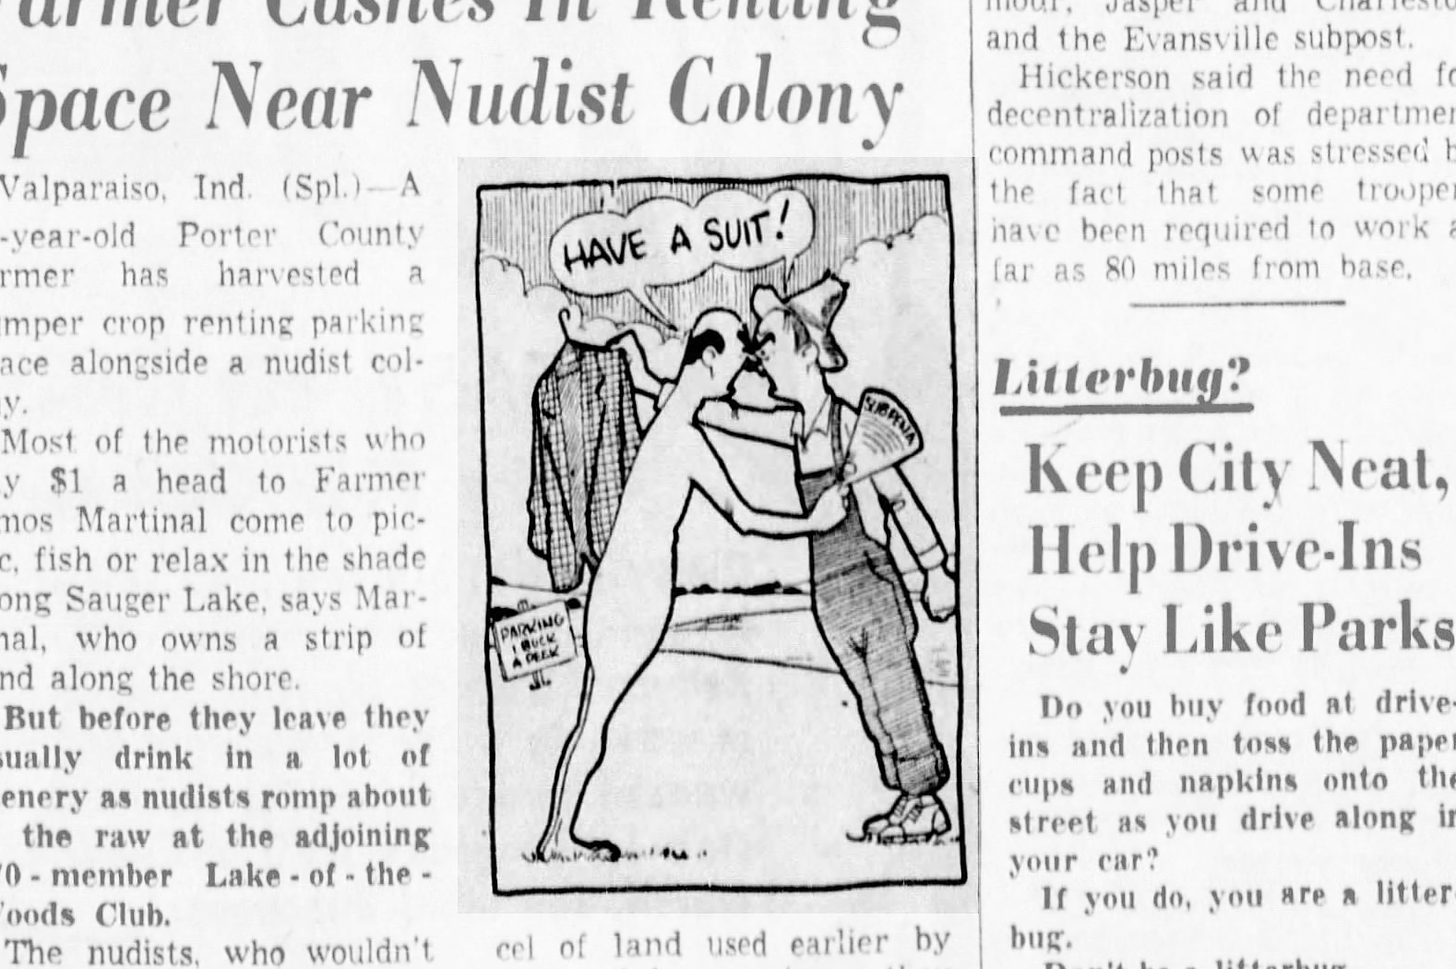 A political cartoon of a farmer holding a shirt and a nudist holding lawsuit paperwork, each men screaming at each other, "Have a suit!" - From The Indianapolis Star, 16 Jul 1954